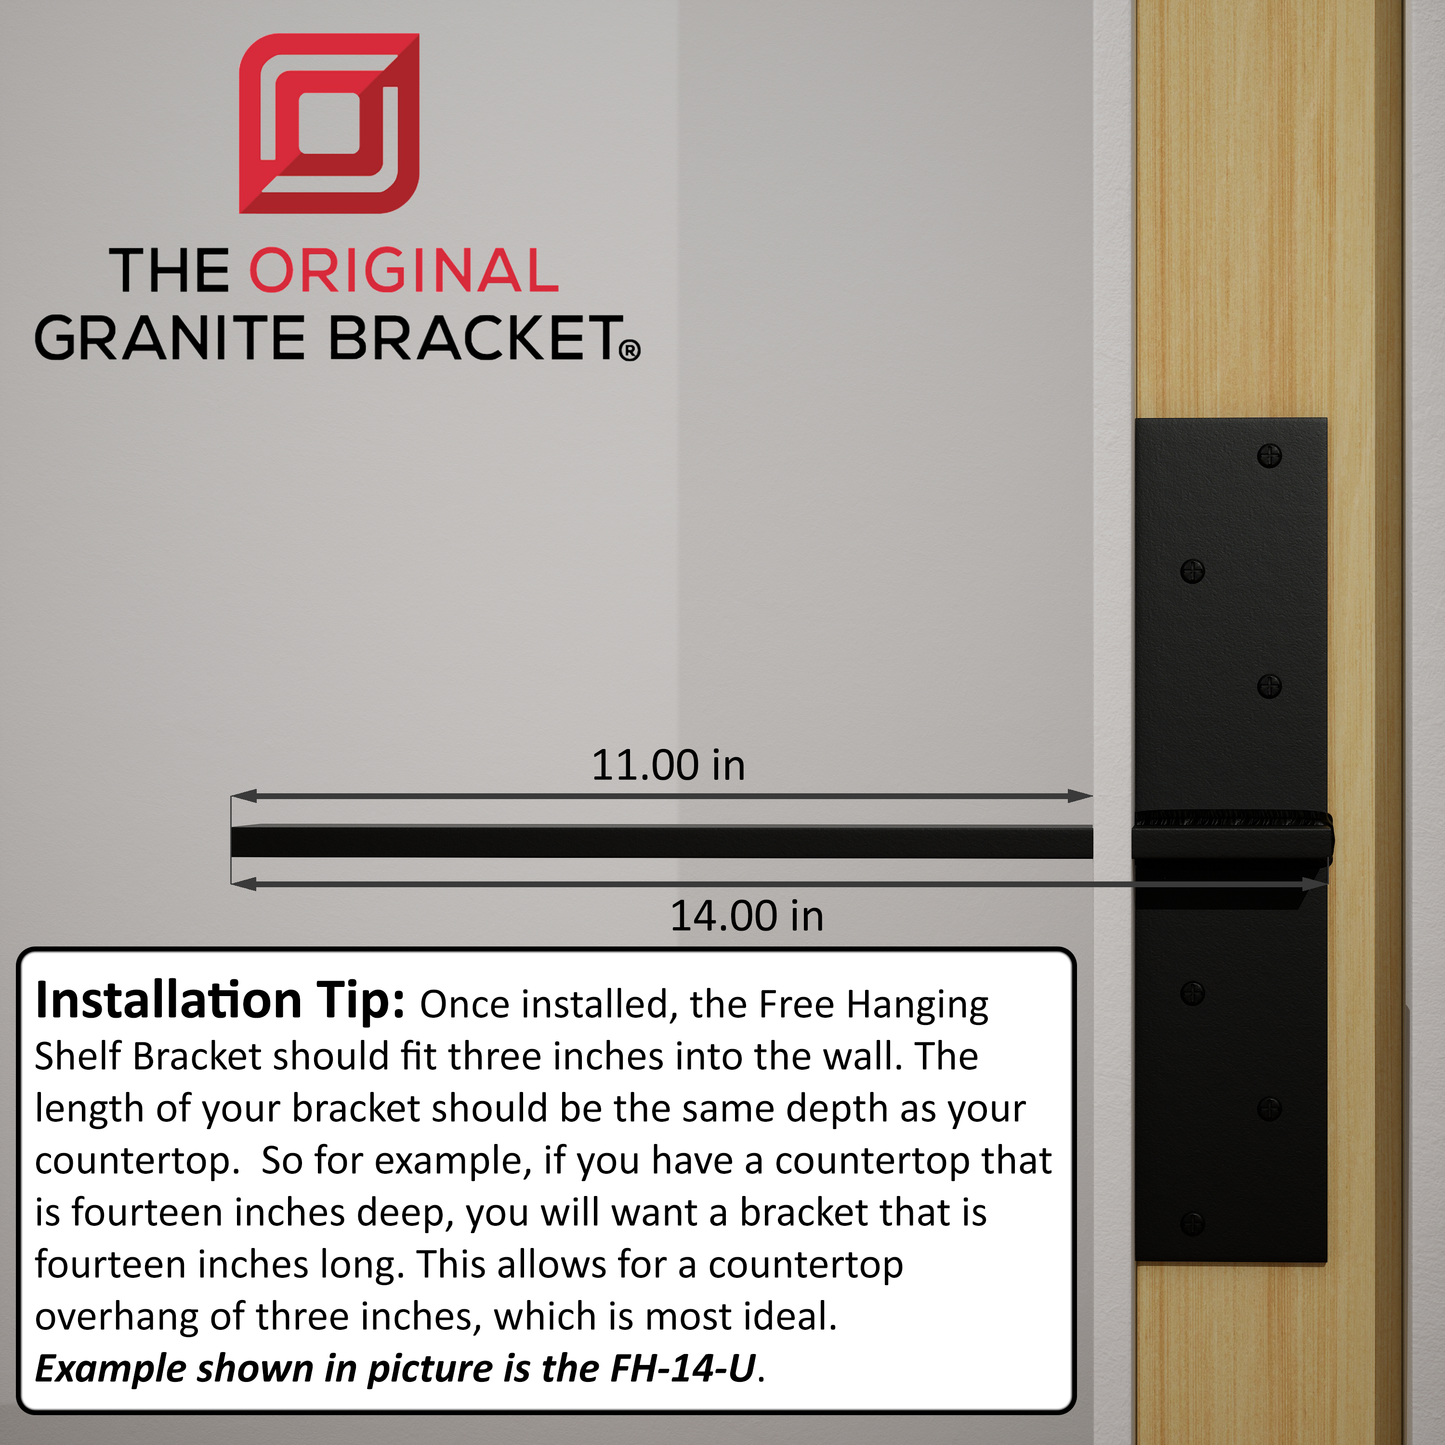 
                  
                    Once installed, the Free Hanging Shelf Bracket should fit three inches into the wall. The length of your bracket should be the same depth as your countertop. So for example, if you have a countertop that is fourteen inches deep, you will want a bracket that is fourteen inches long. This allows for a countertop overhang of three inches, which is most ideal. Example shown in picture is the FH-14-U.
                  
                